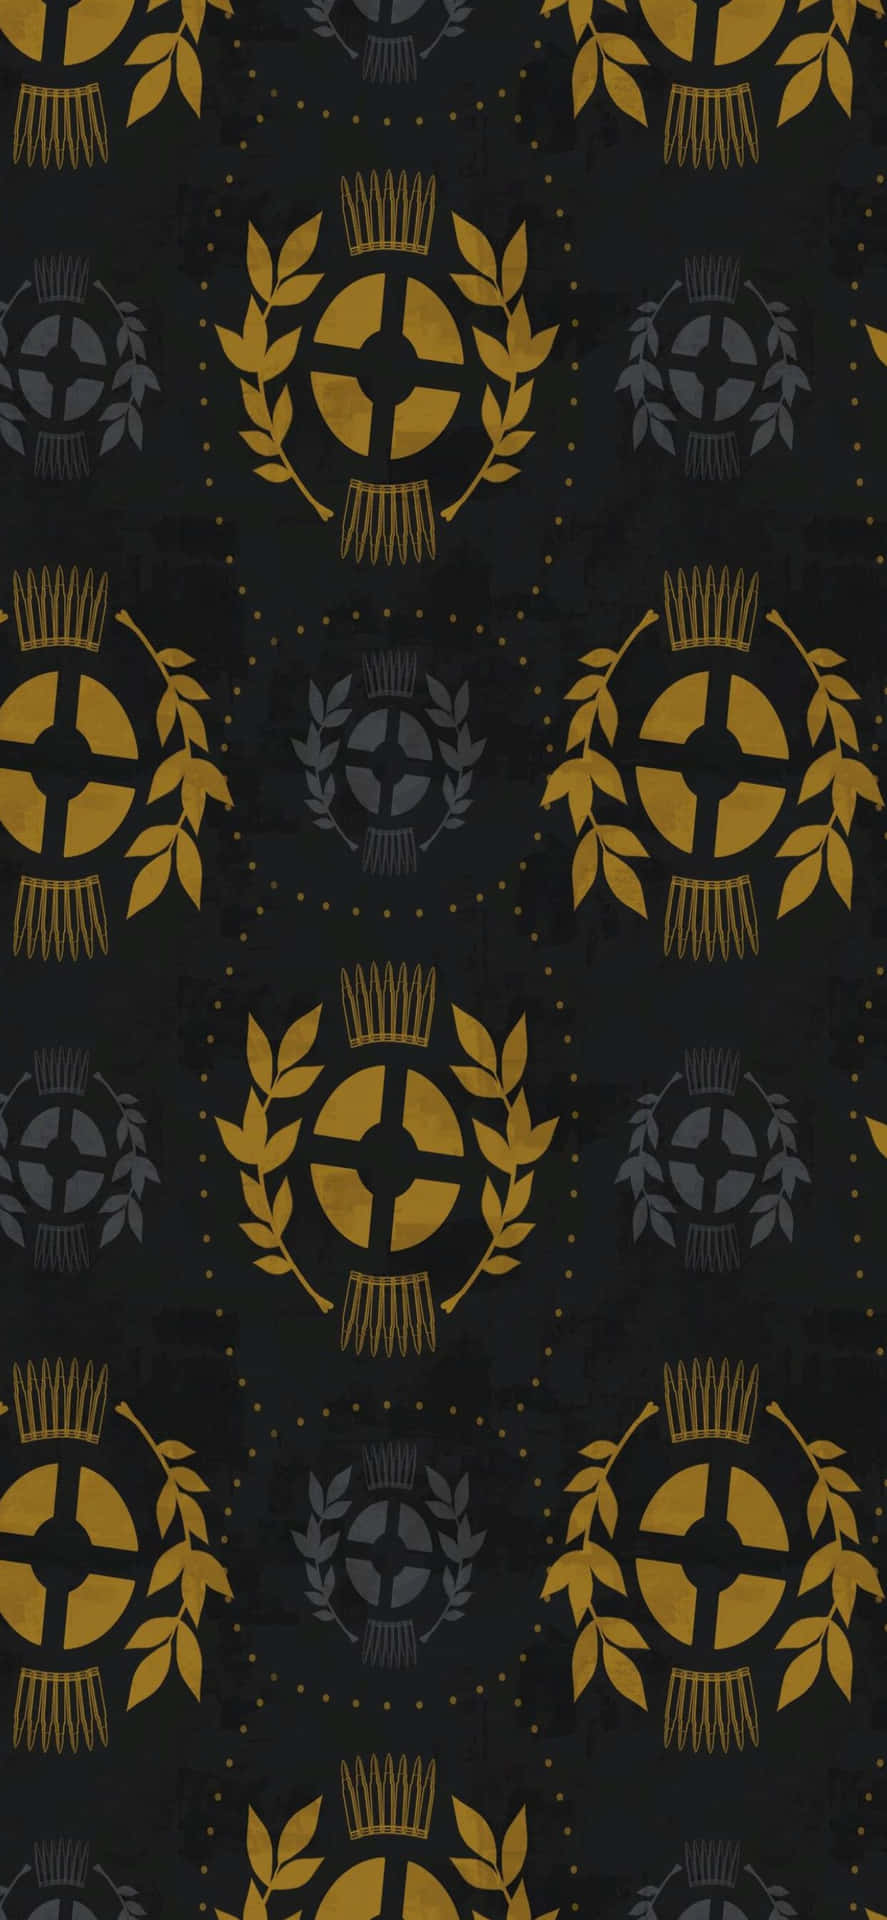 a black and gold pattern with leaves and leaves